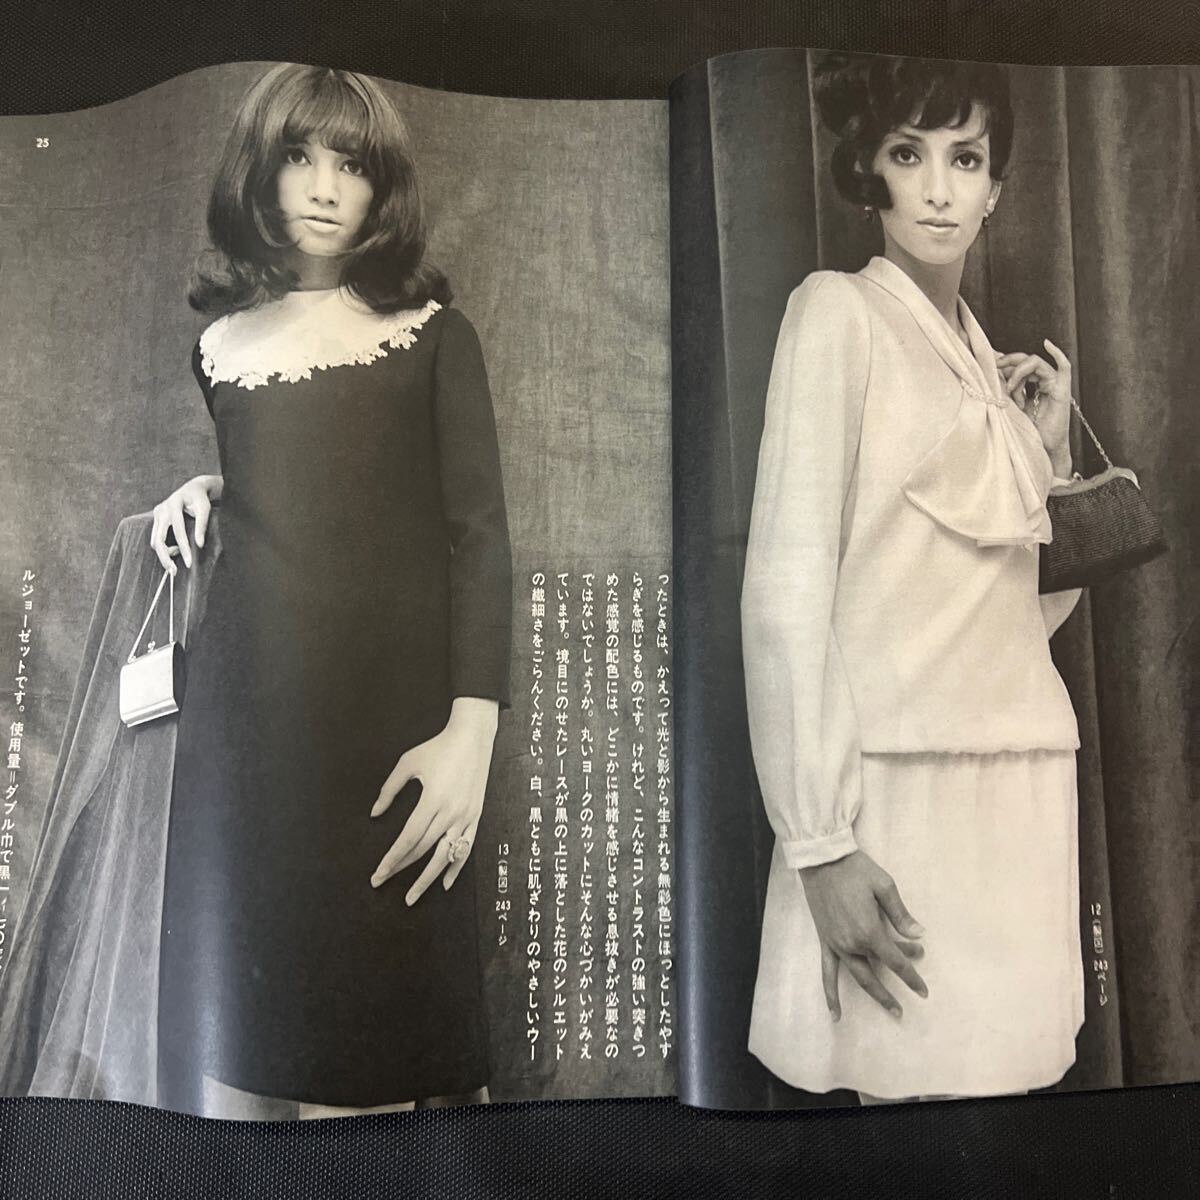  equipment . magazine so-en 1967 year 12 month number culture clothes equipment .. publish department Showa era 42 year that time thing Vintage rare retro secondhand book Showa Retro attire research appendix attaching coat 